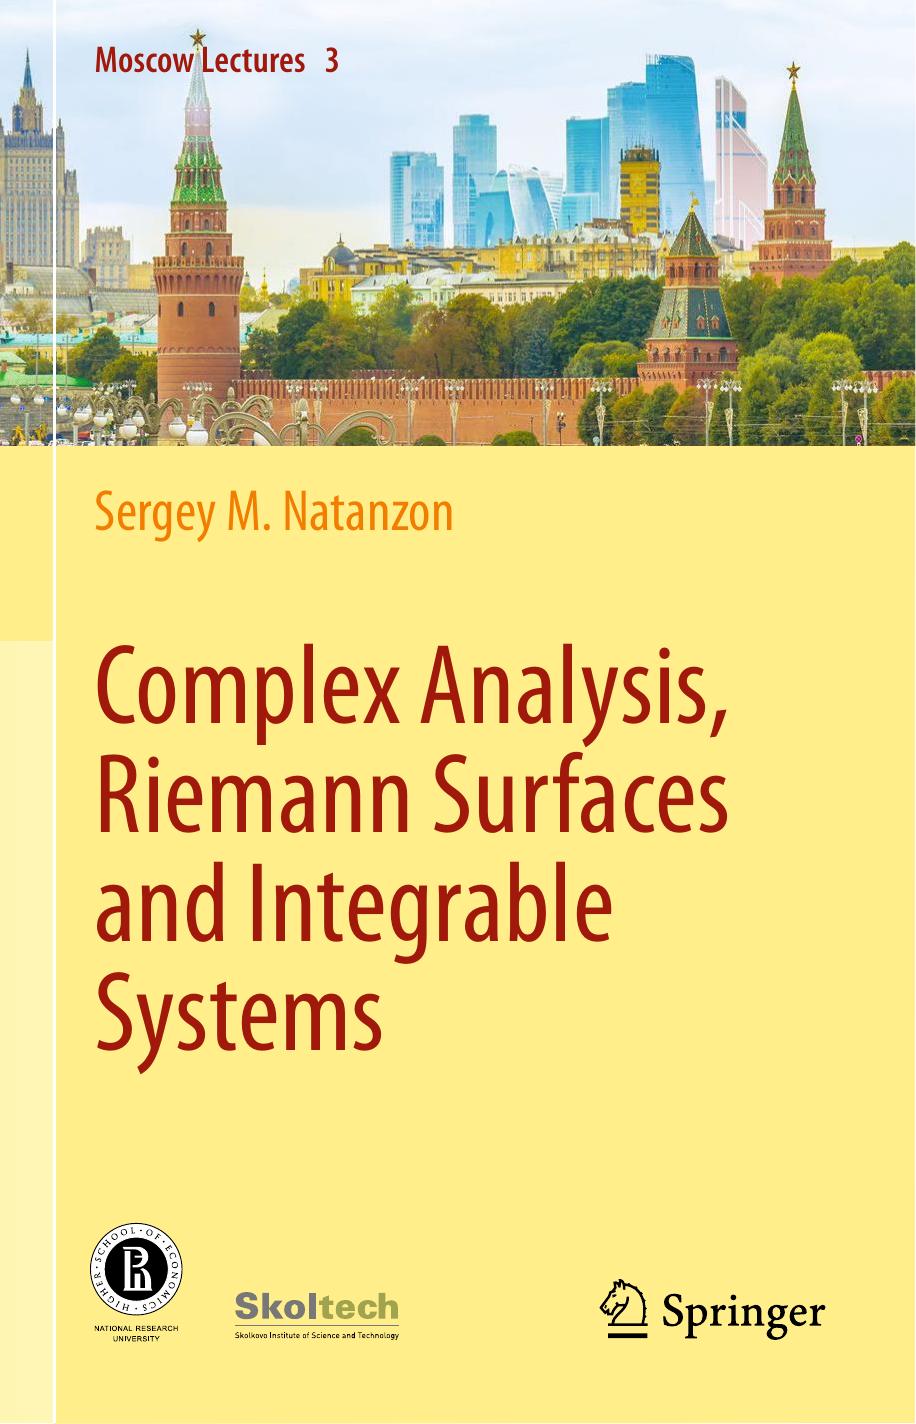 Complex Analysis, Riemann Surfaces and Integrable Systems - Volume 3